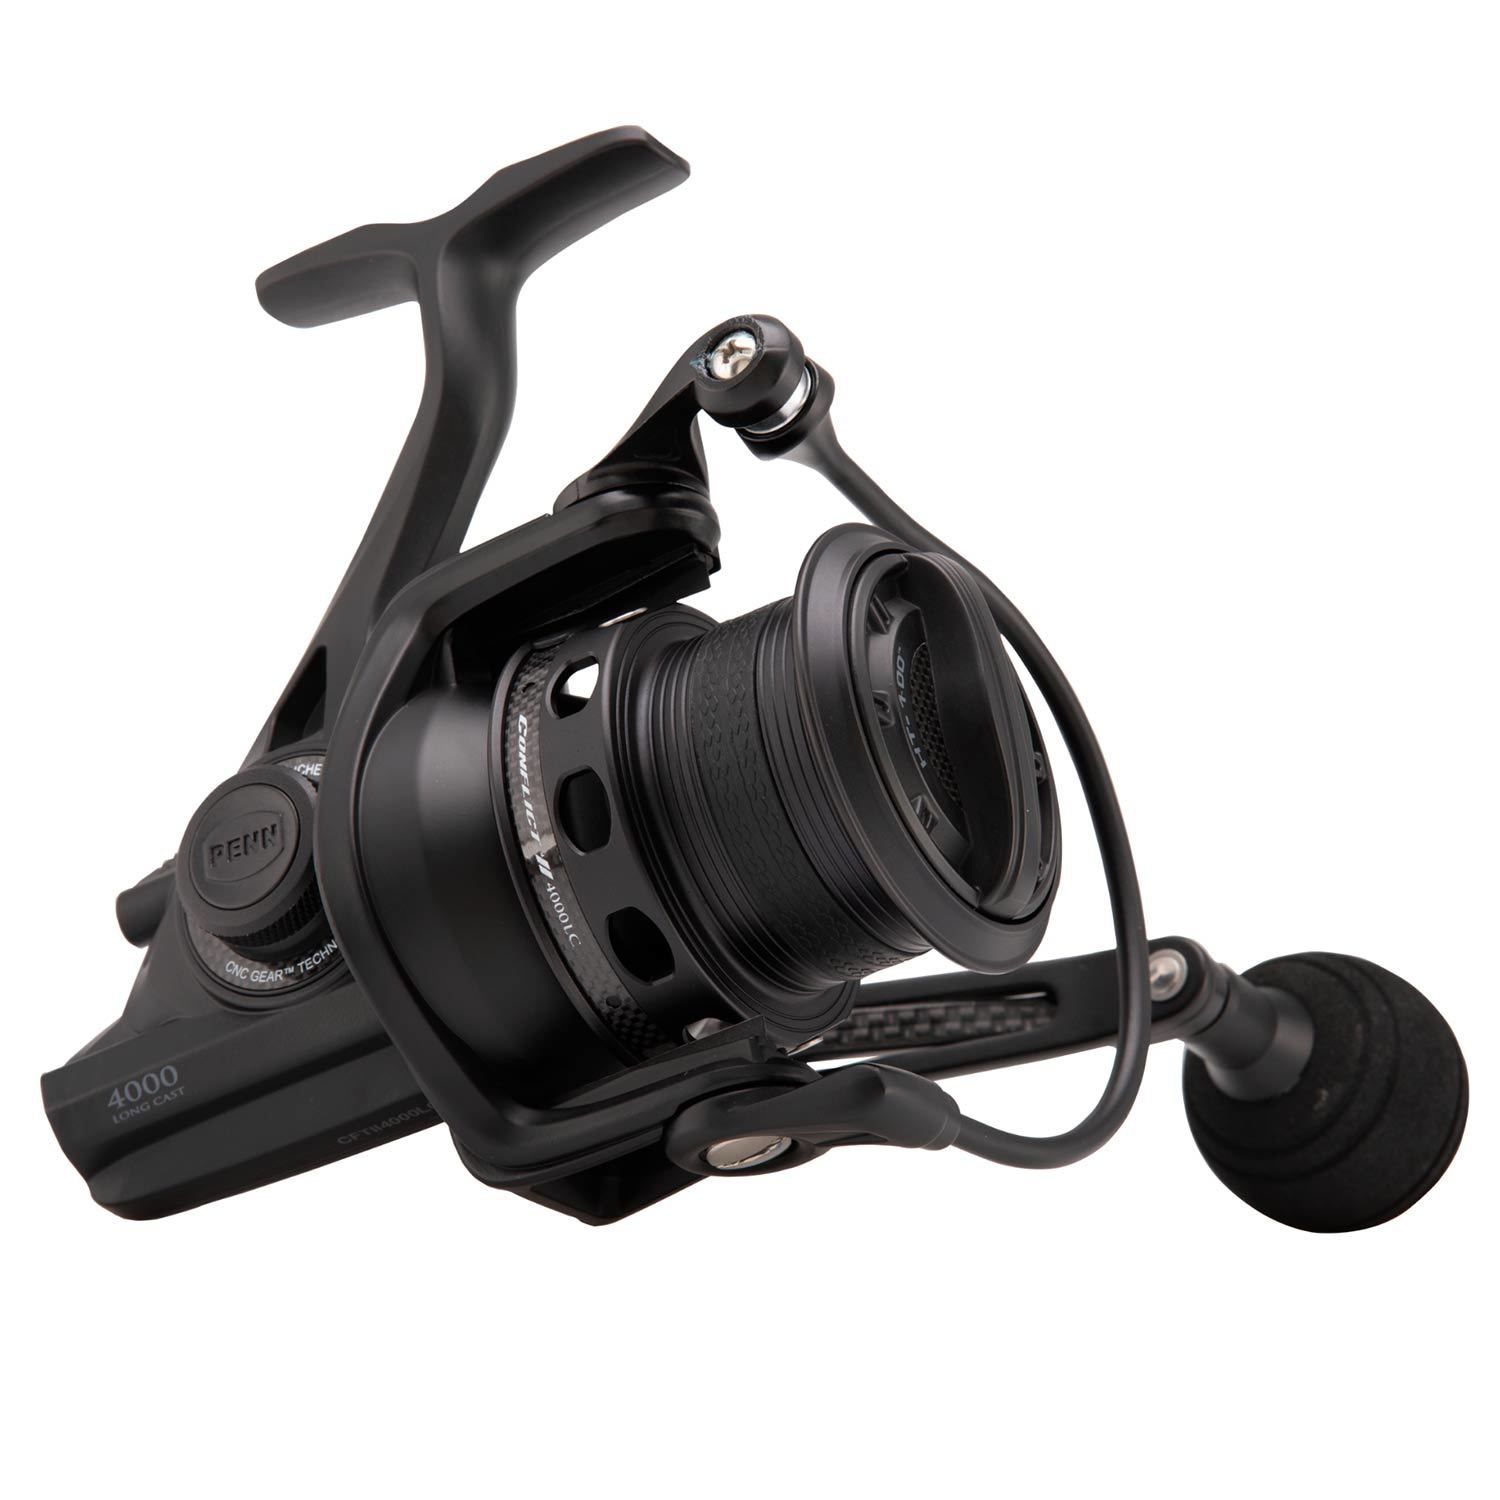 Conflict® II 4000 LC Spinning Reel